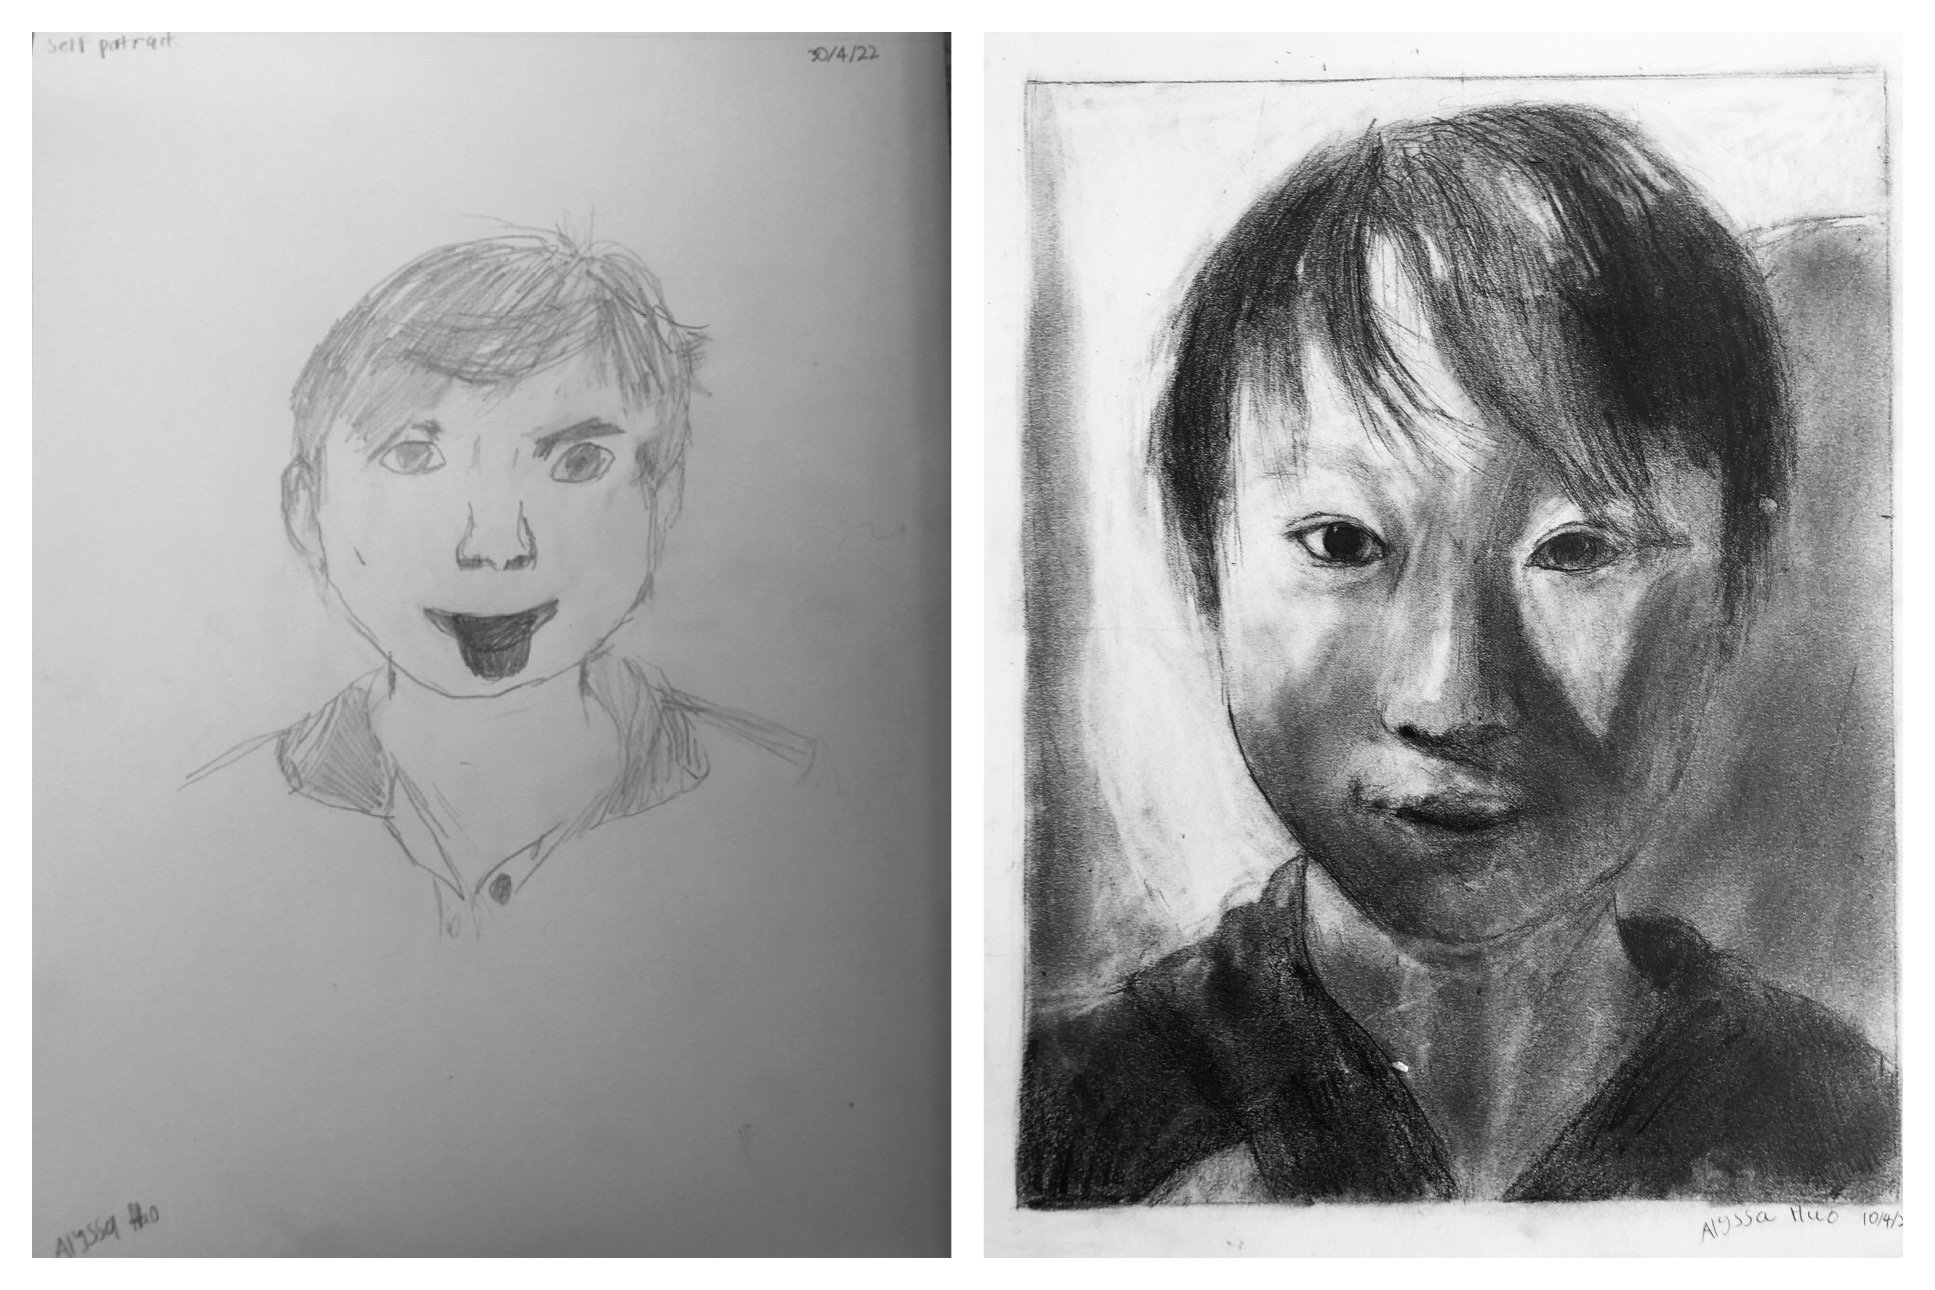 12 Year Old Alyssa's. Before and After self-portraits April 4-9, 2022